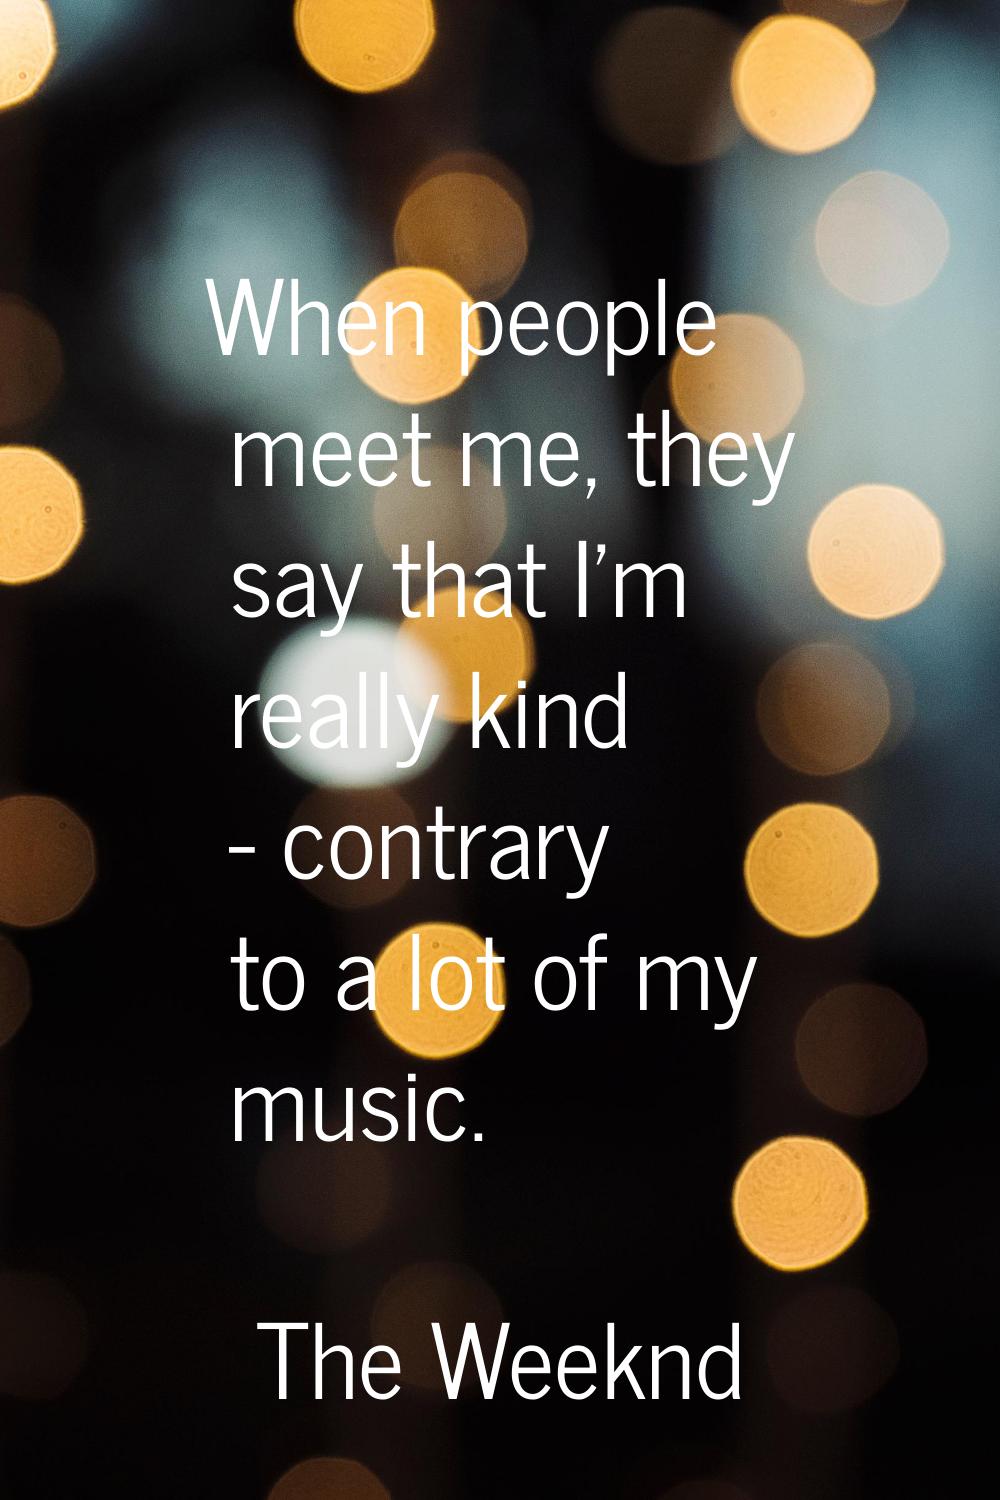 When people meet me, they say that I'm really kind - contrary to a lot of my music.